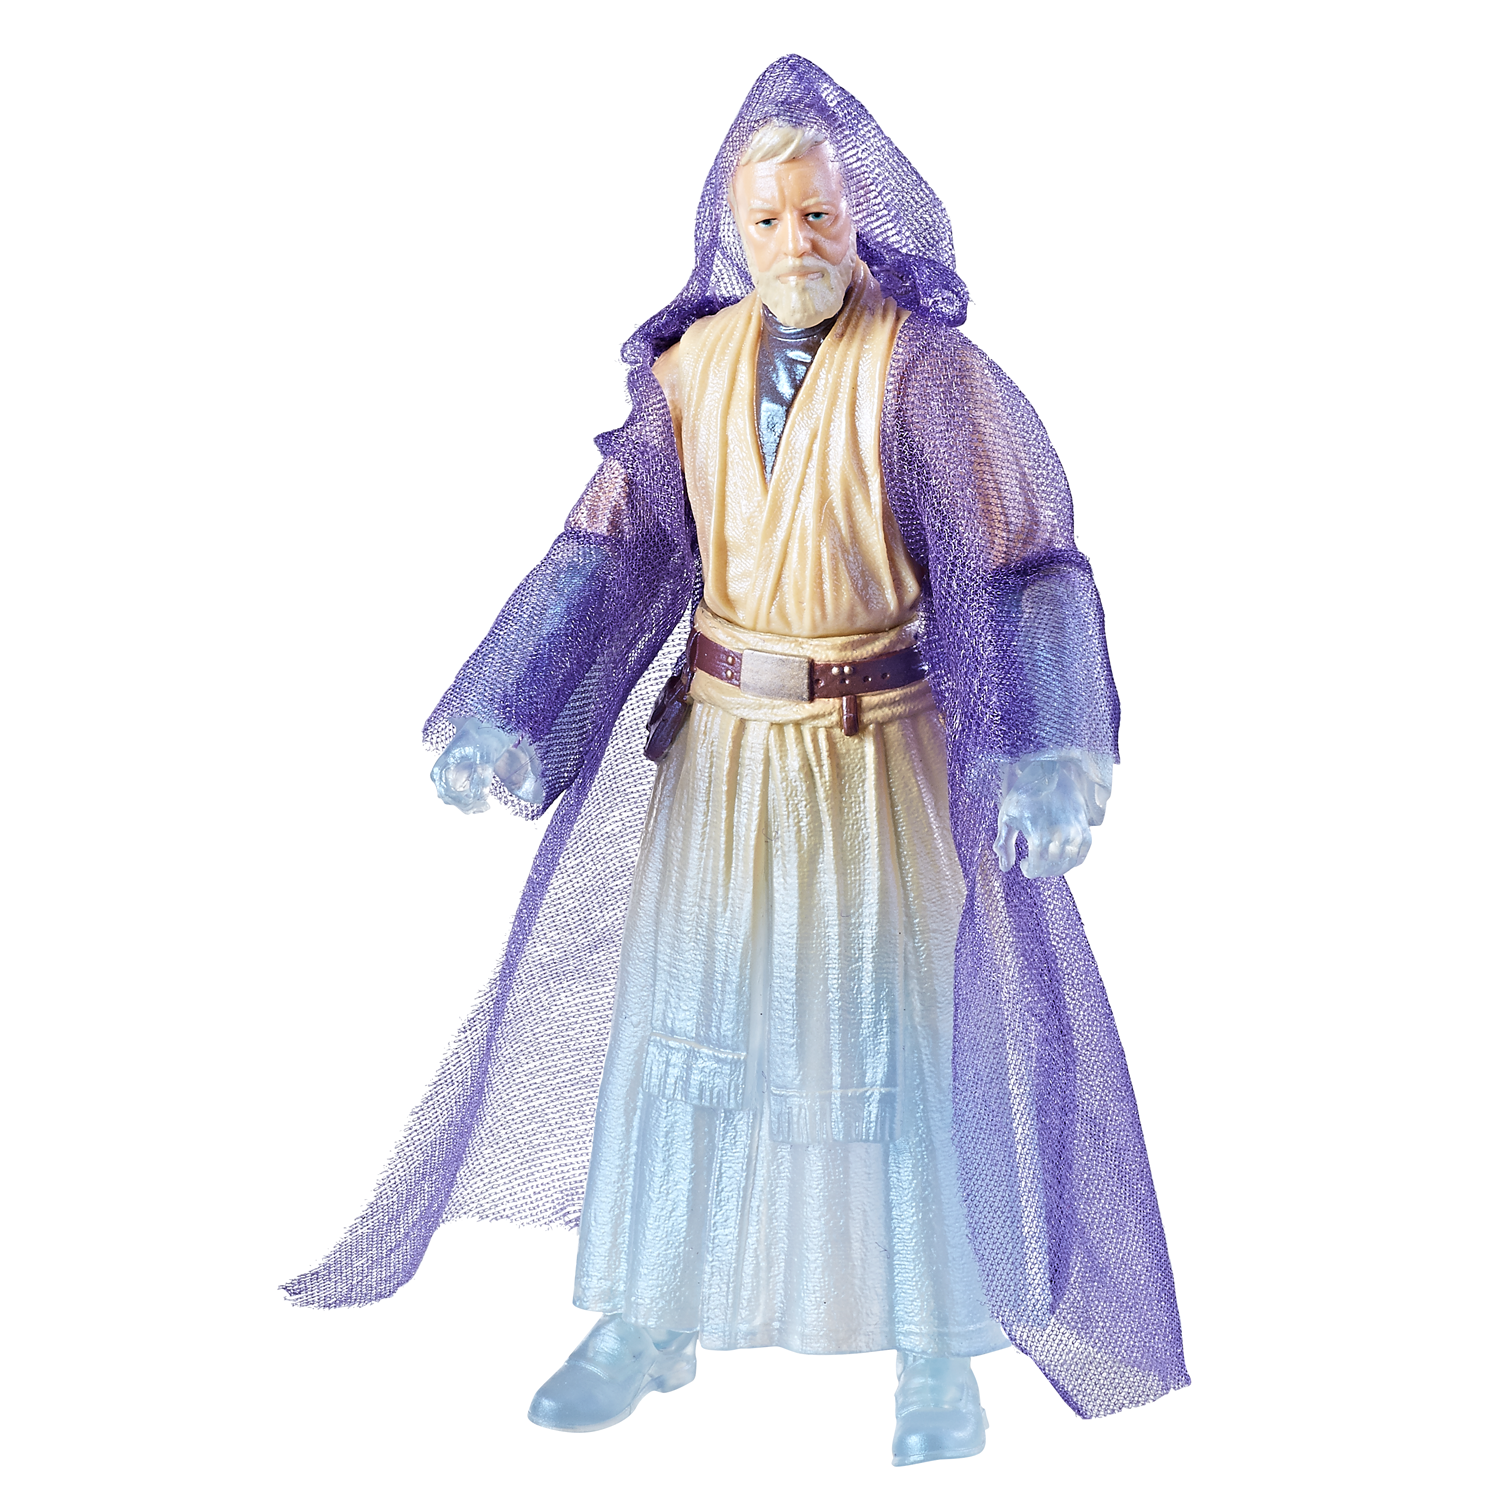 An Exclusive Look At The Dark Side Of The New Star Wars Action Figures